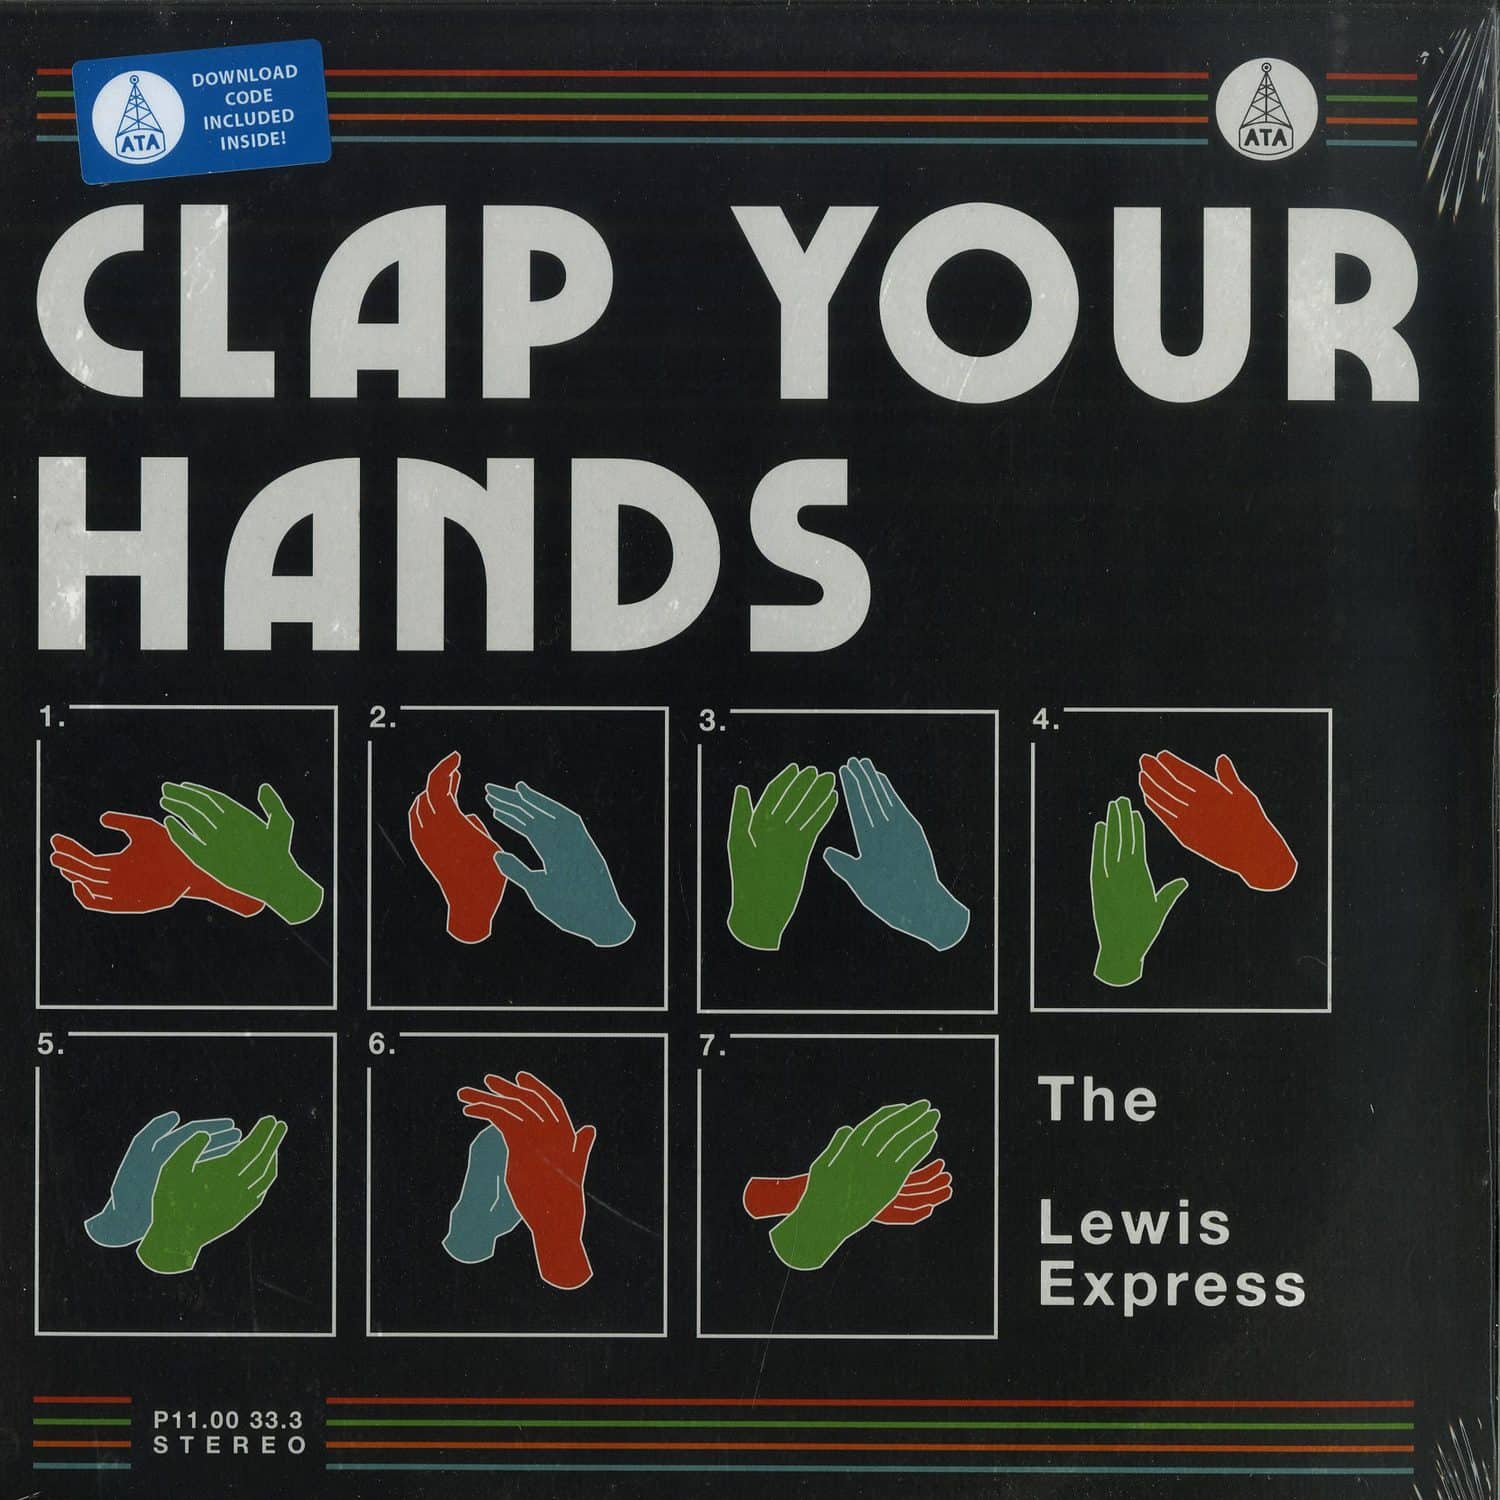 The Lewis Express - CLAP YOUR HANDS 